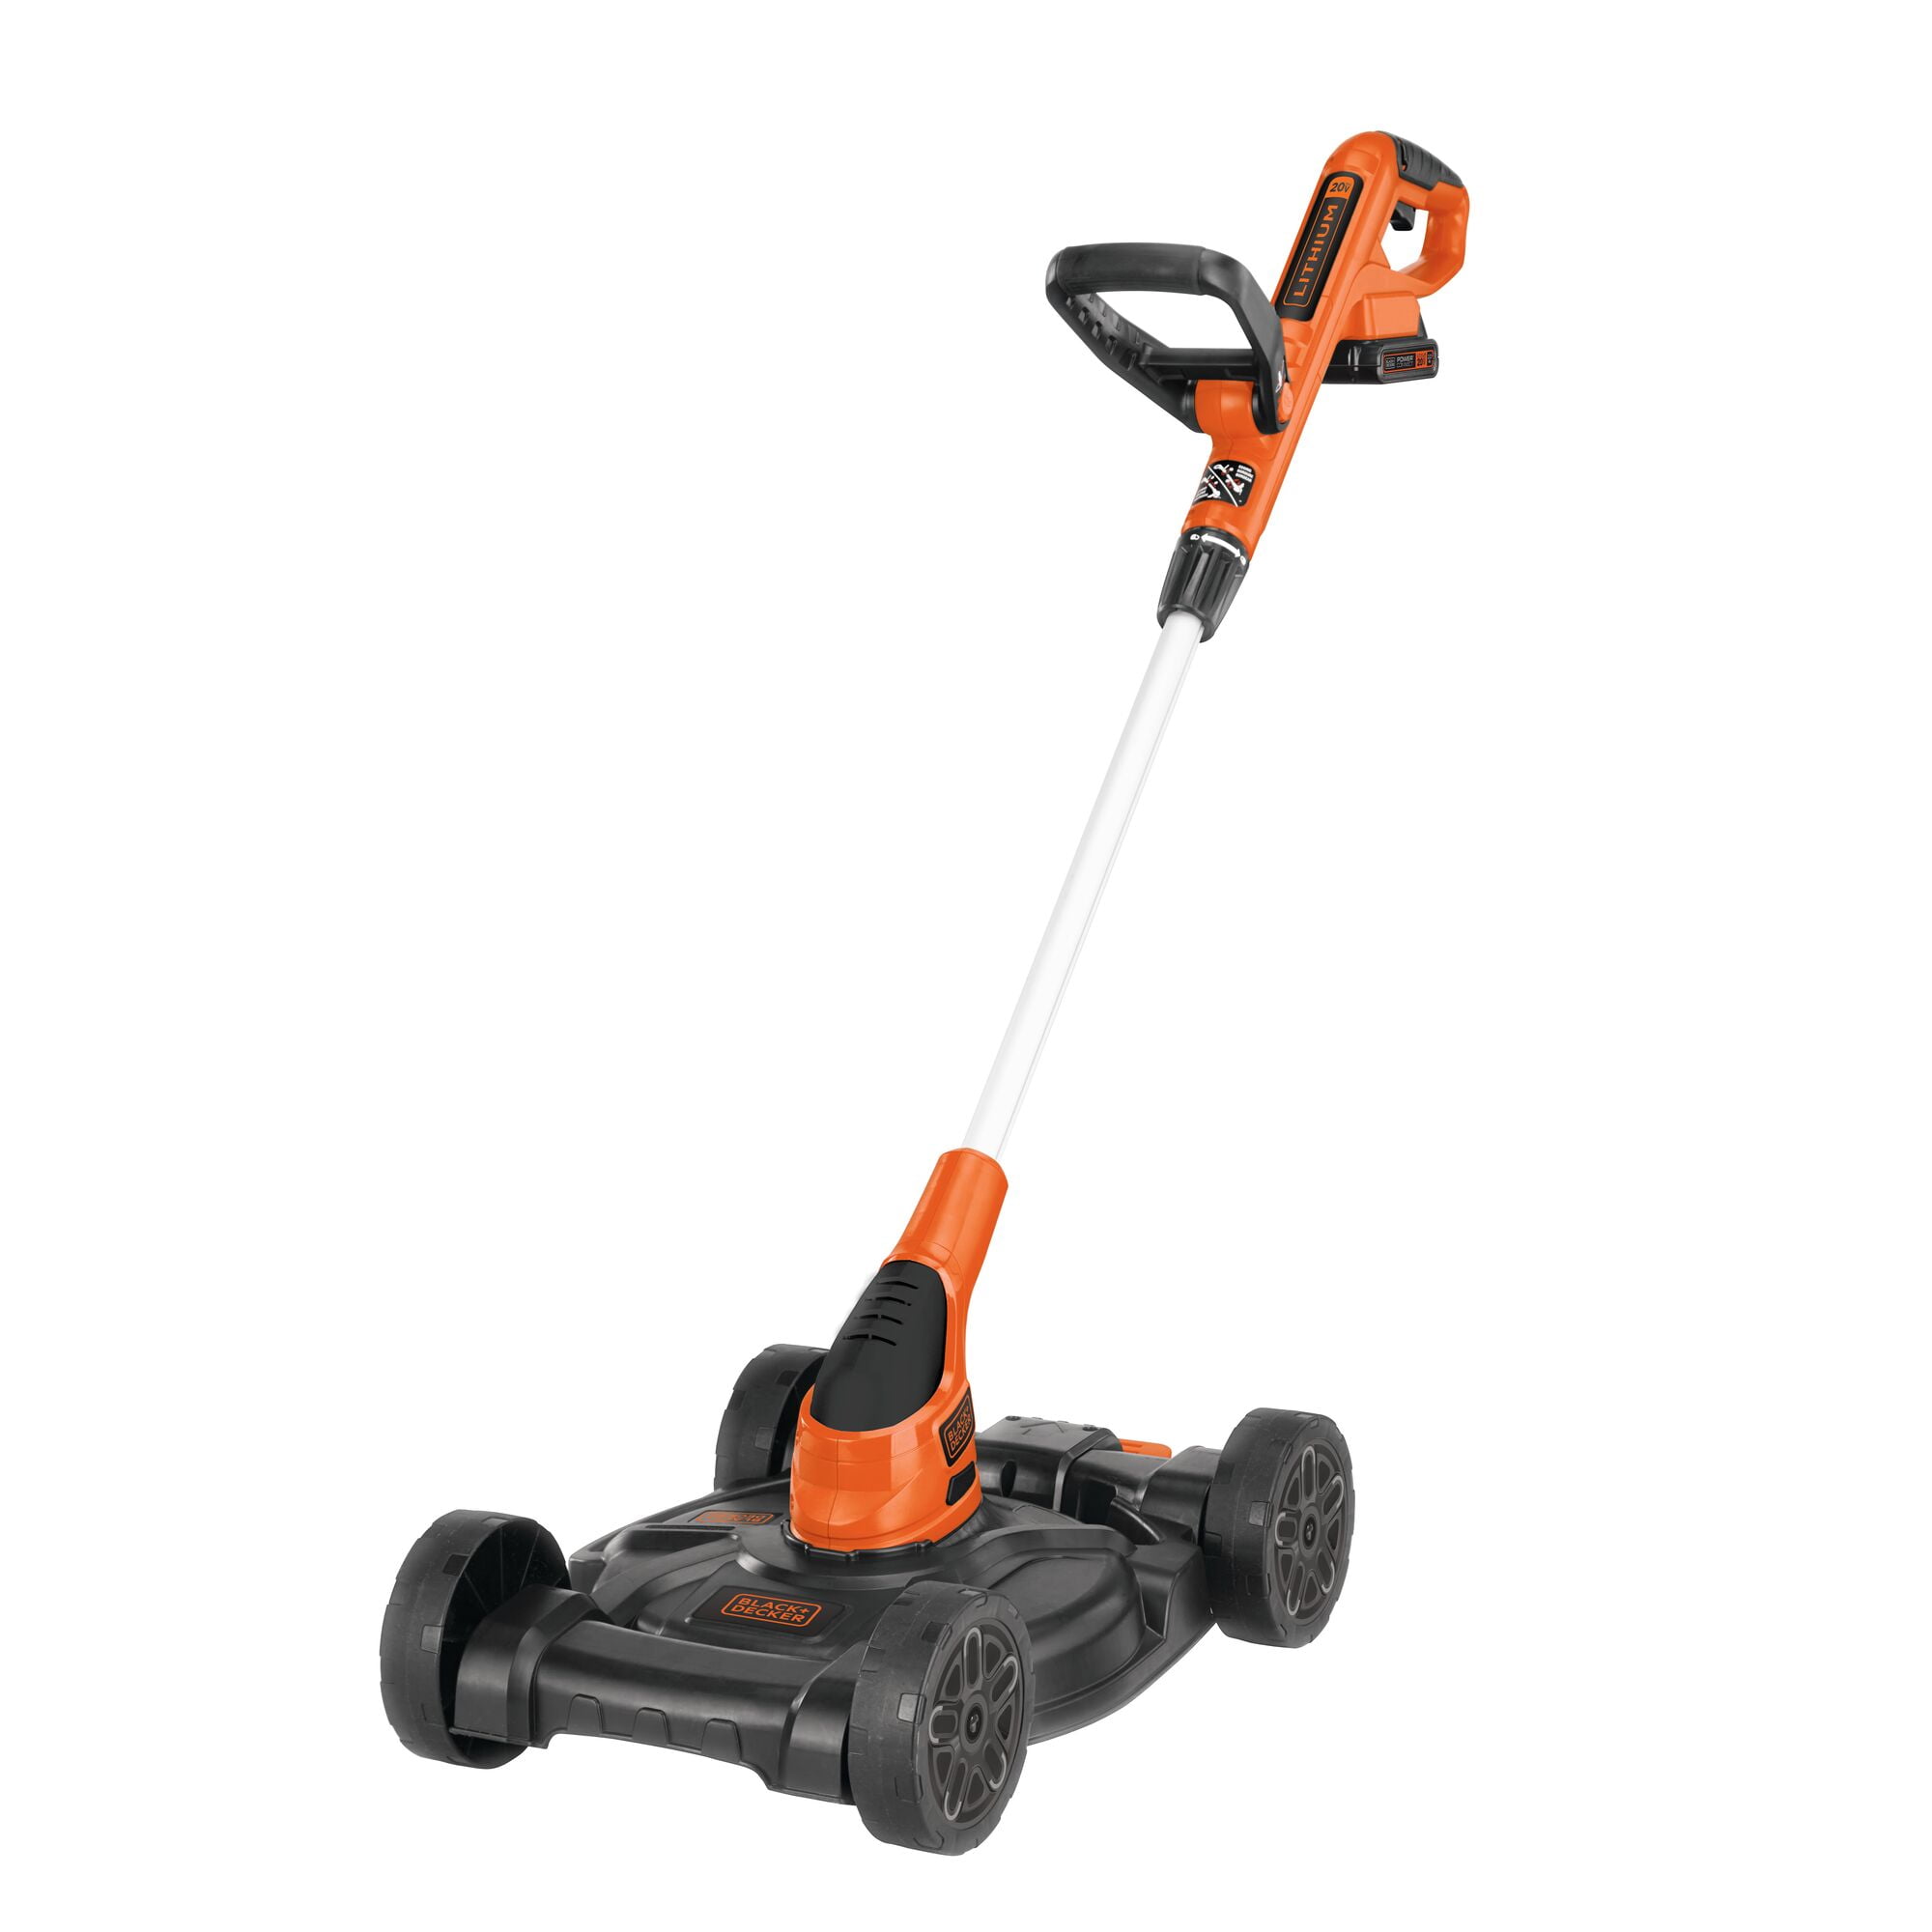 Black and Decker 8220 Deluxe Lawn edger and trimmer - Tools